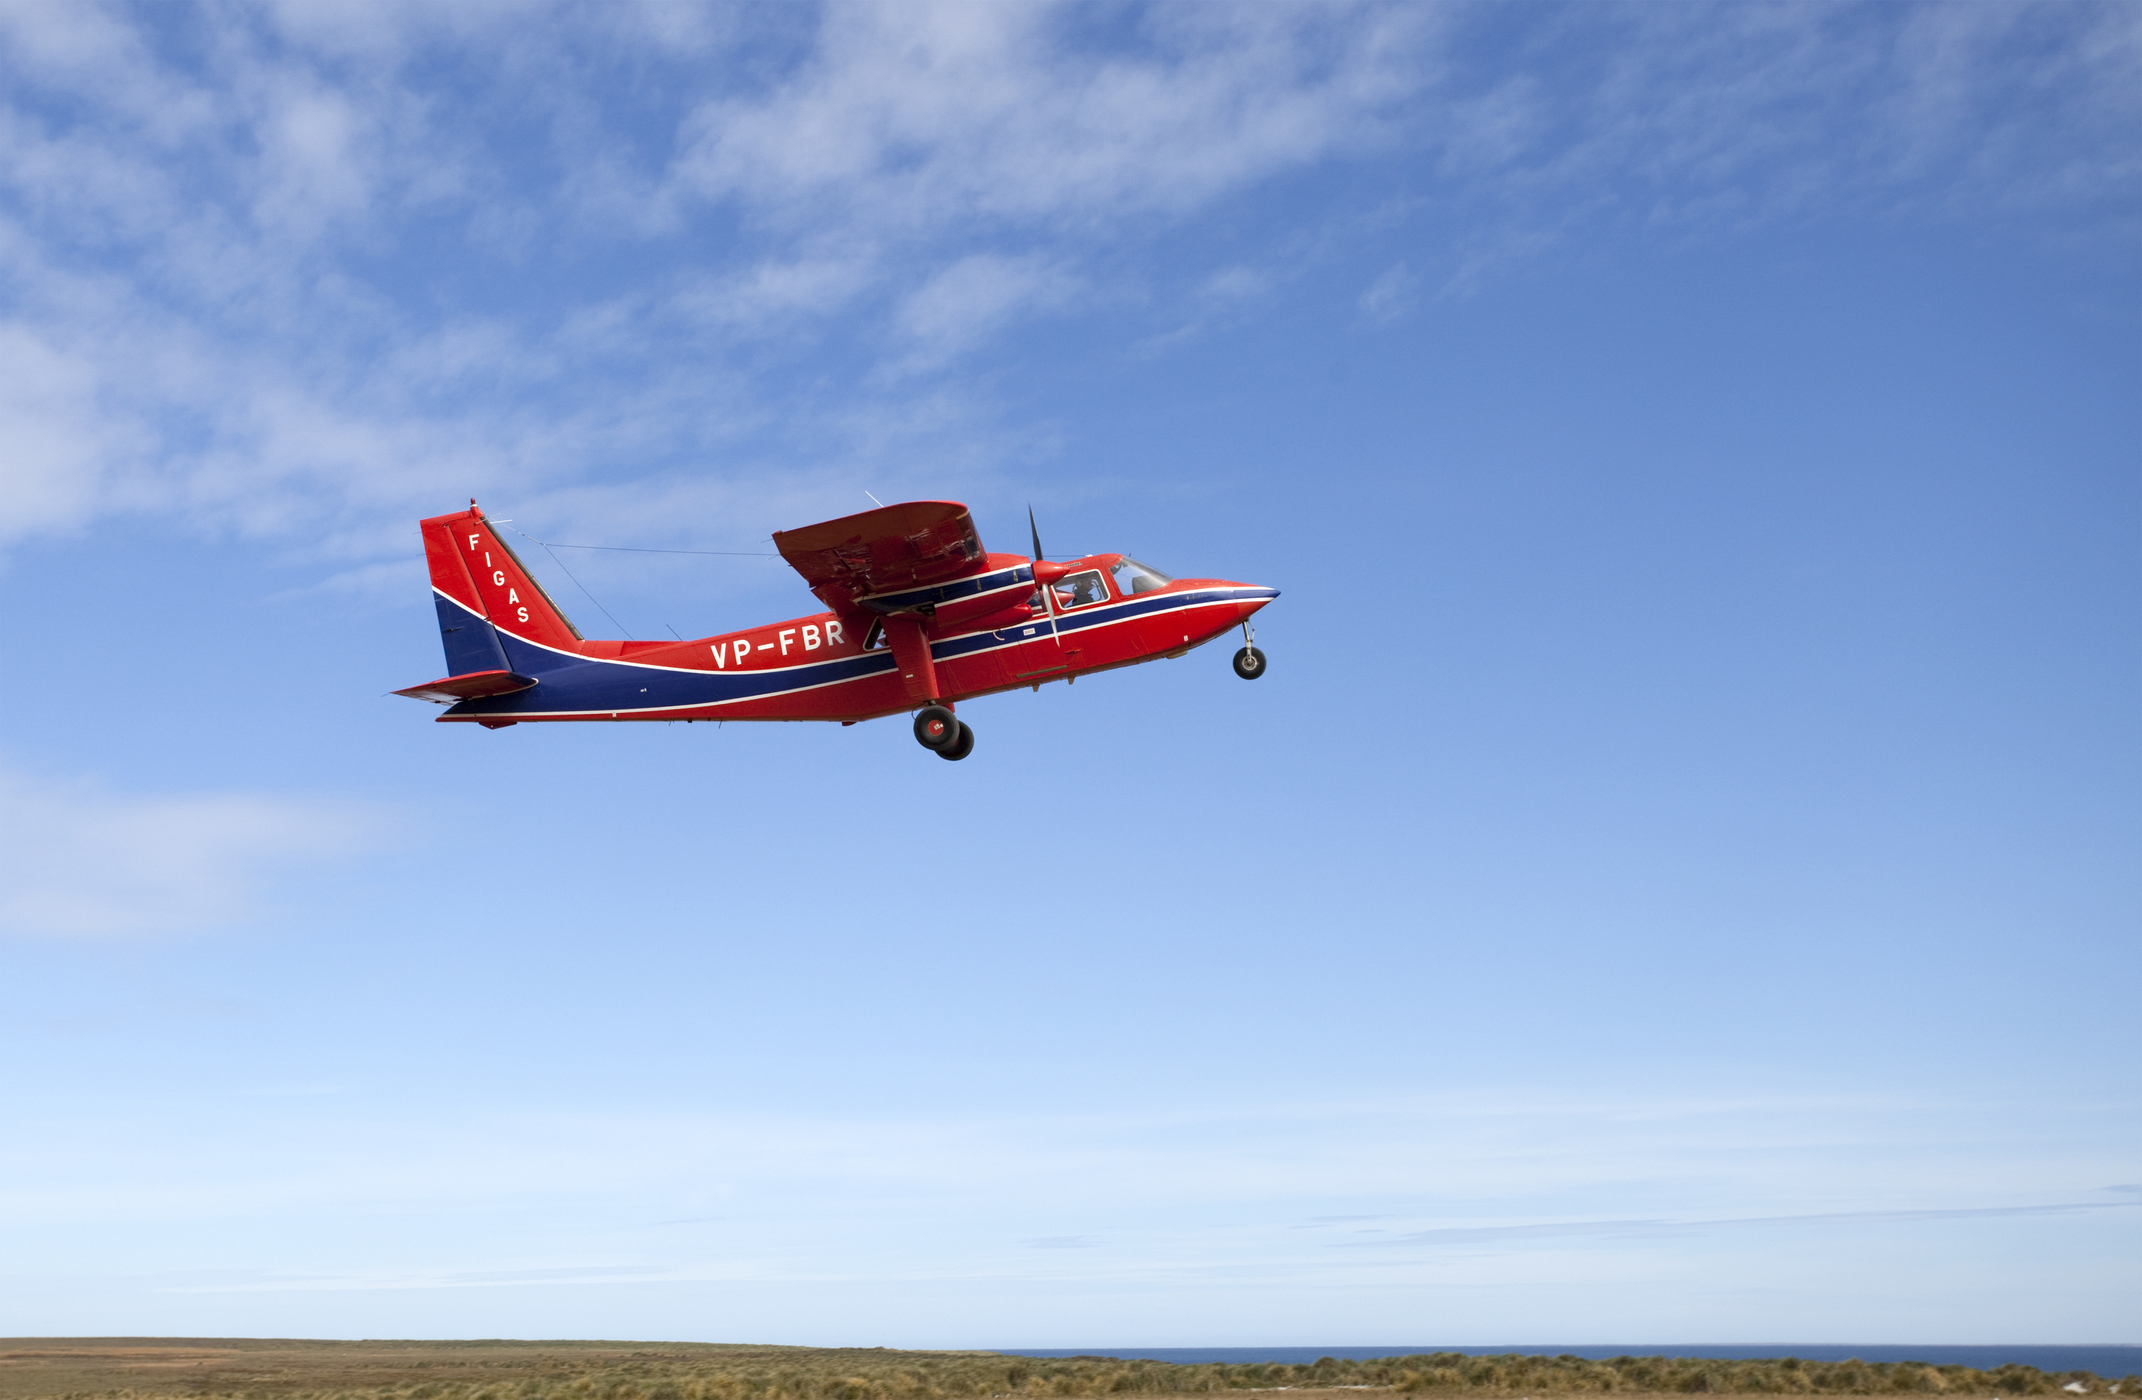 A red and blue propeller plane takes off in good weather.